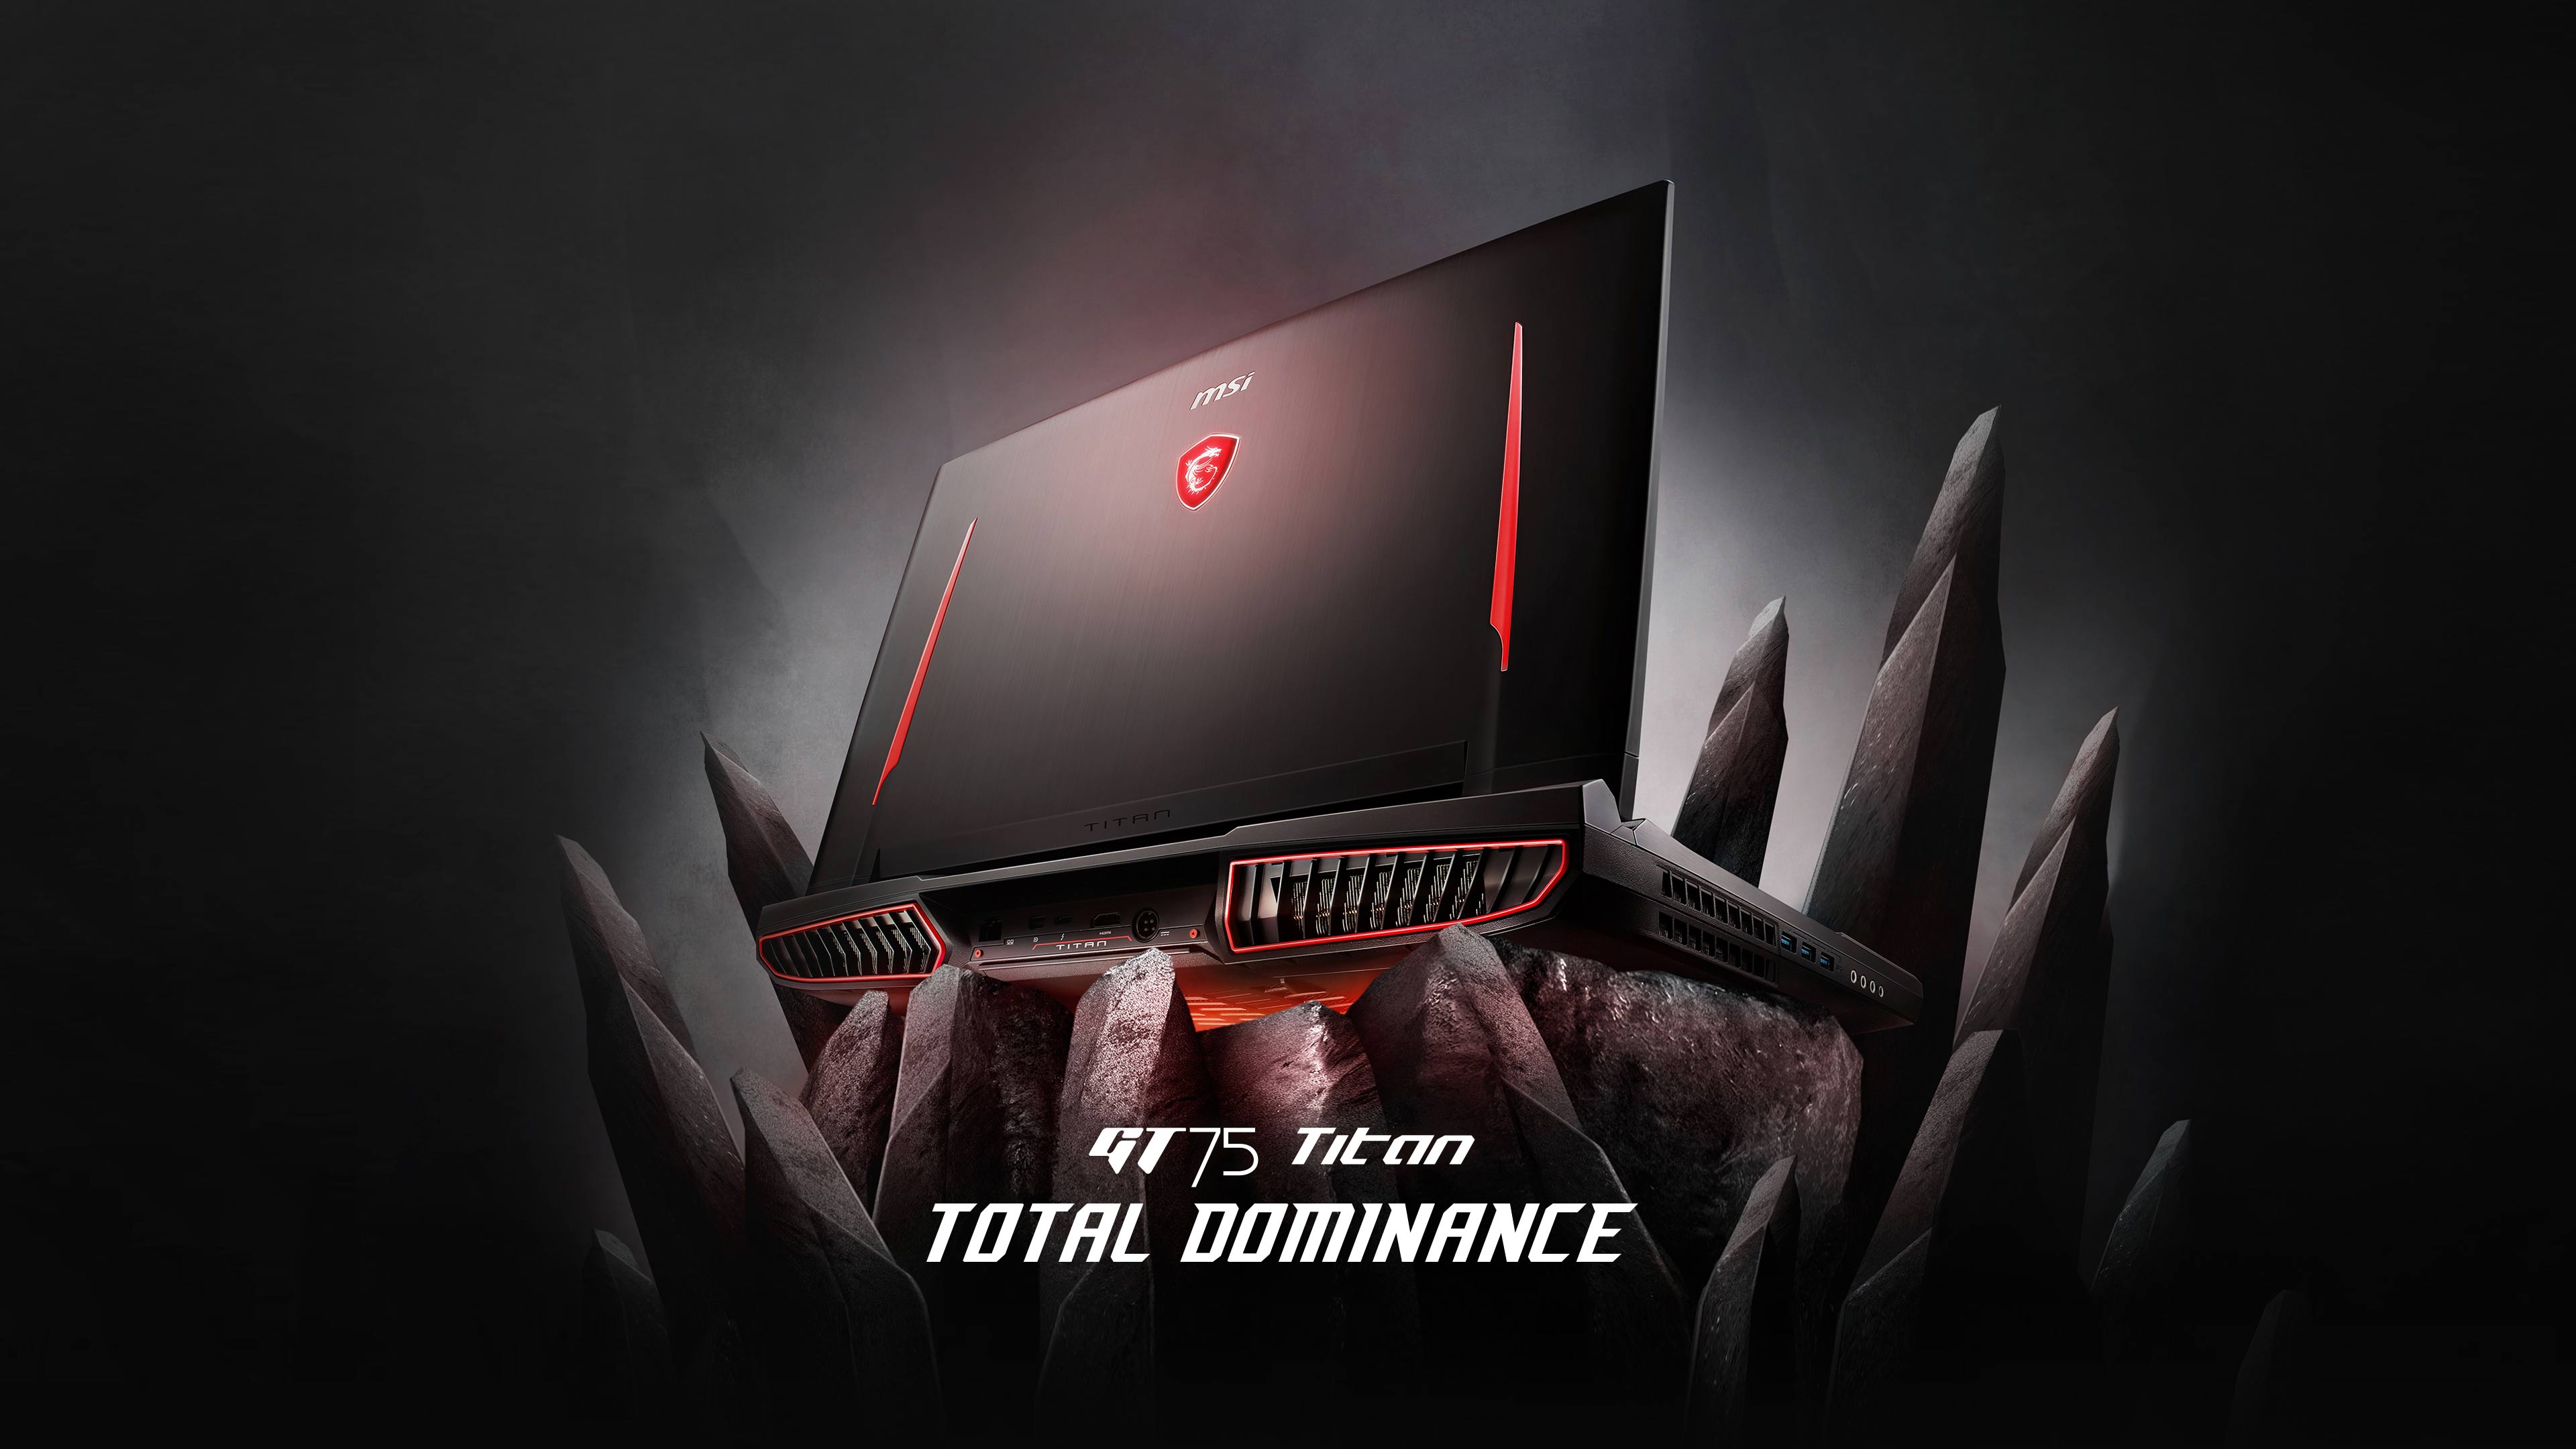 Wallpaper. MSI Global Leading Brand In High End Gaming & Professional Creation